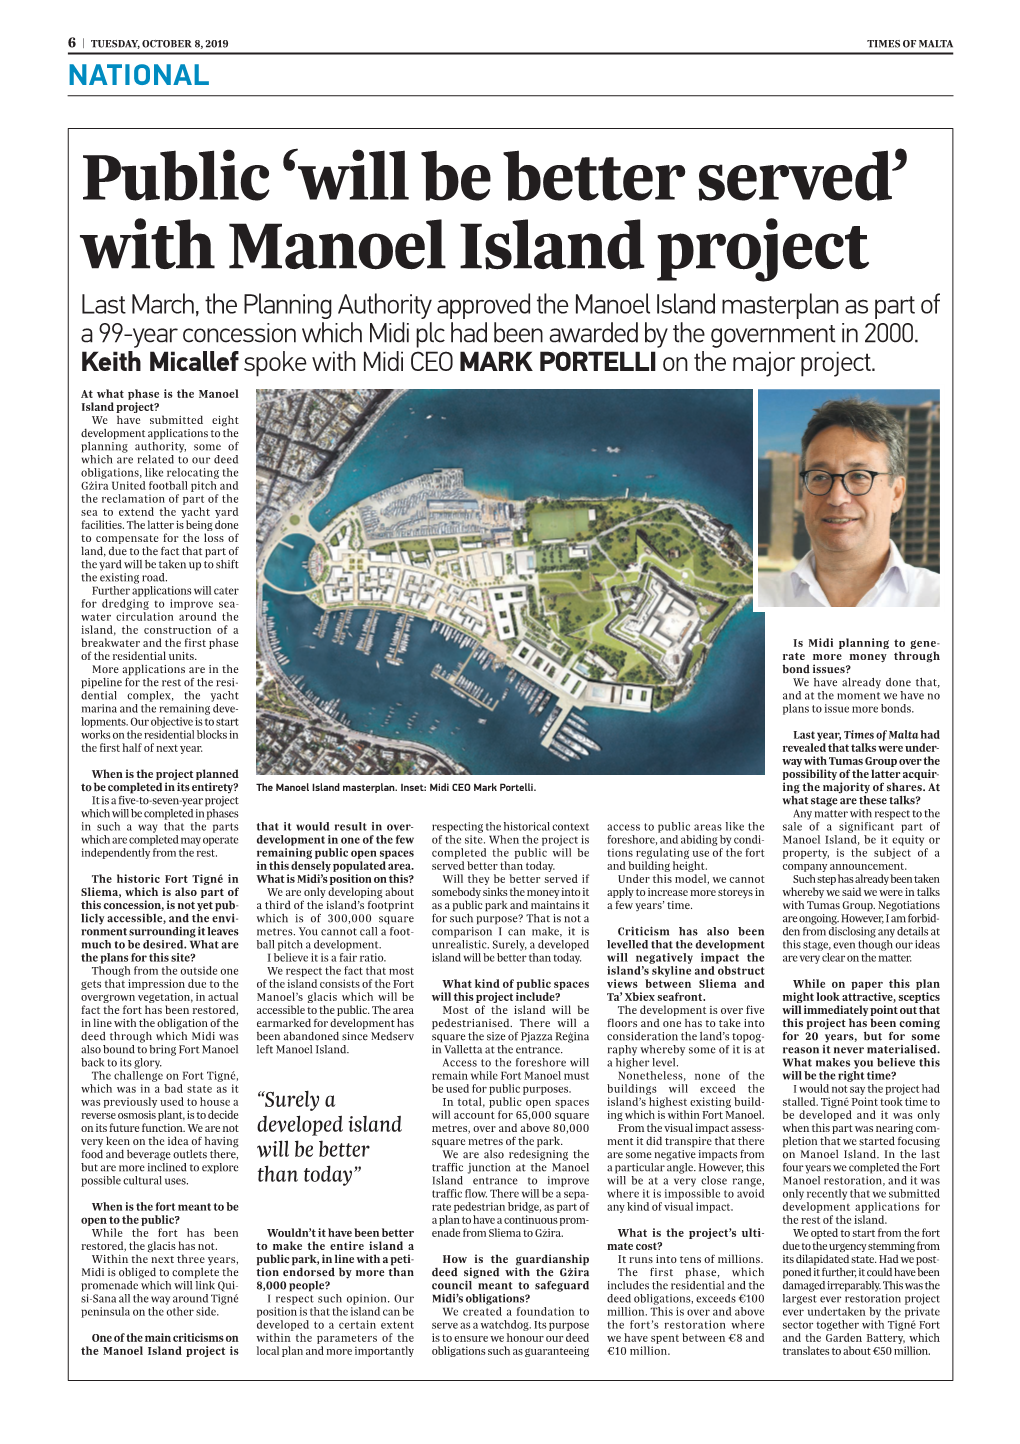 Public 'Will Be Better Served' with Manoel Island Project